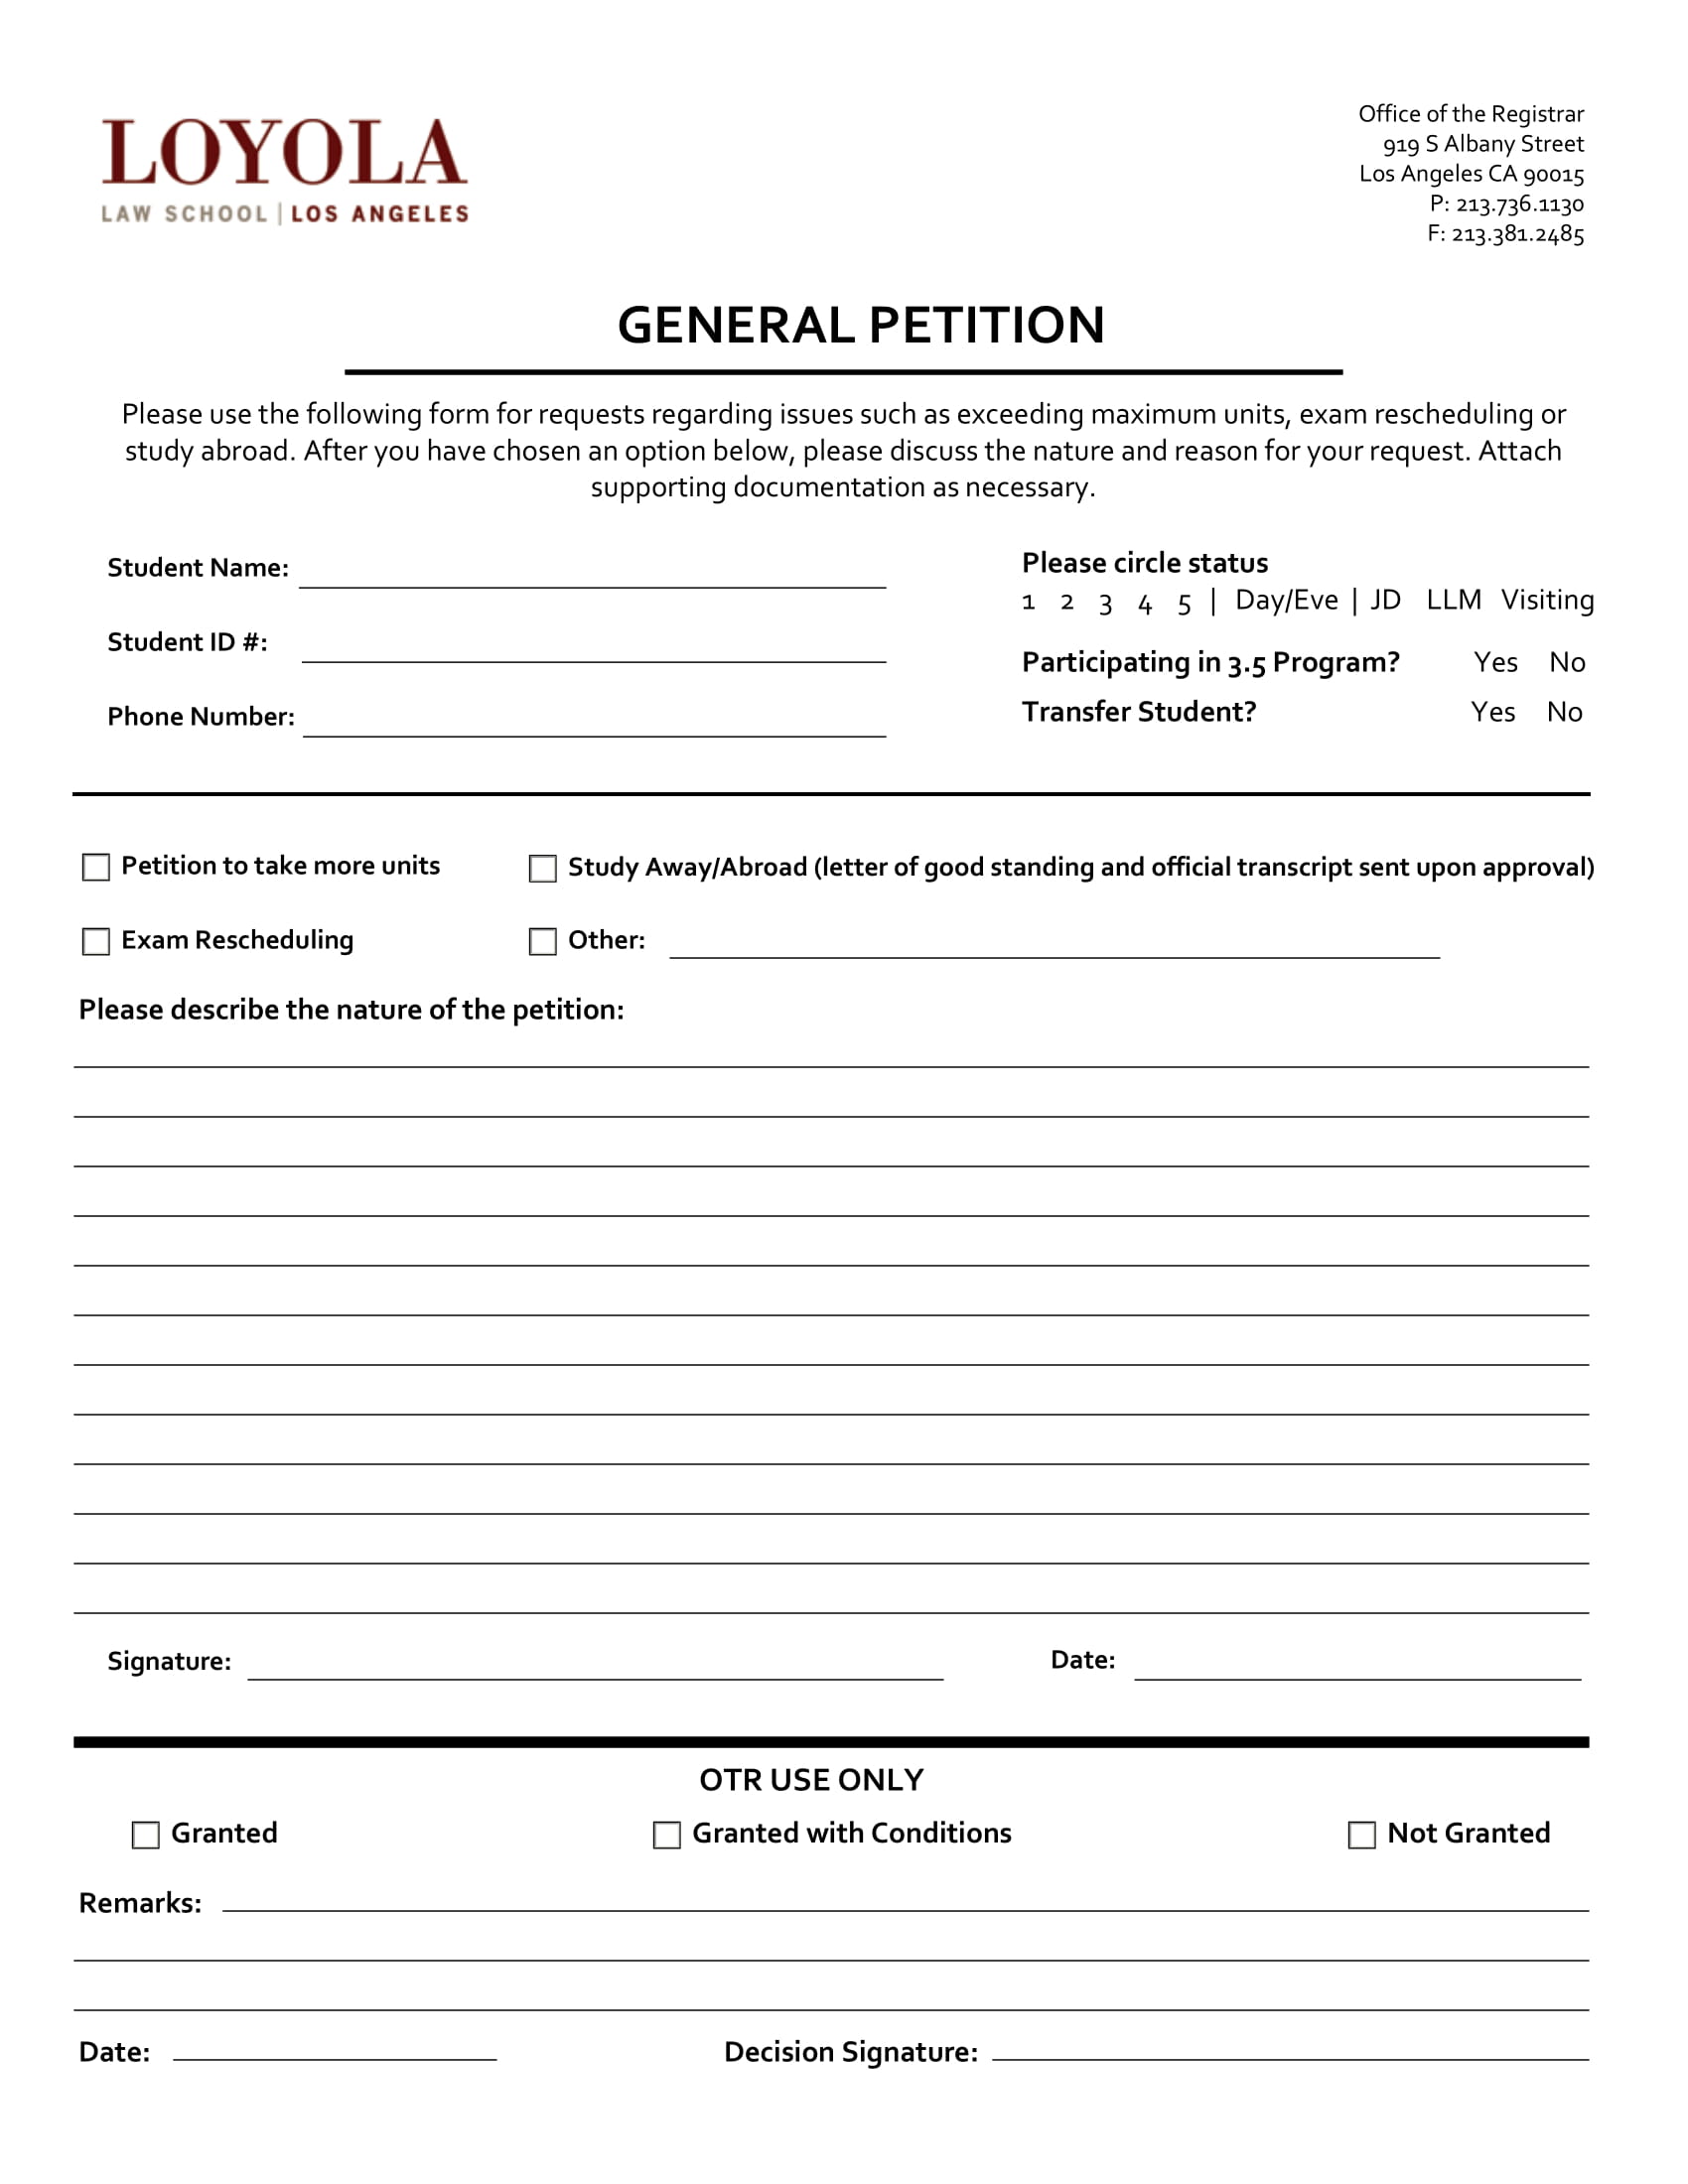 mi petition and order for assignment